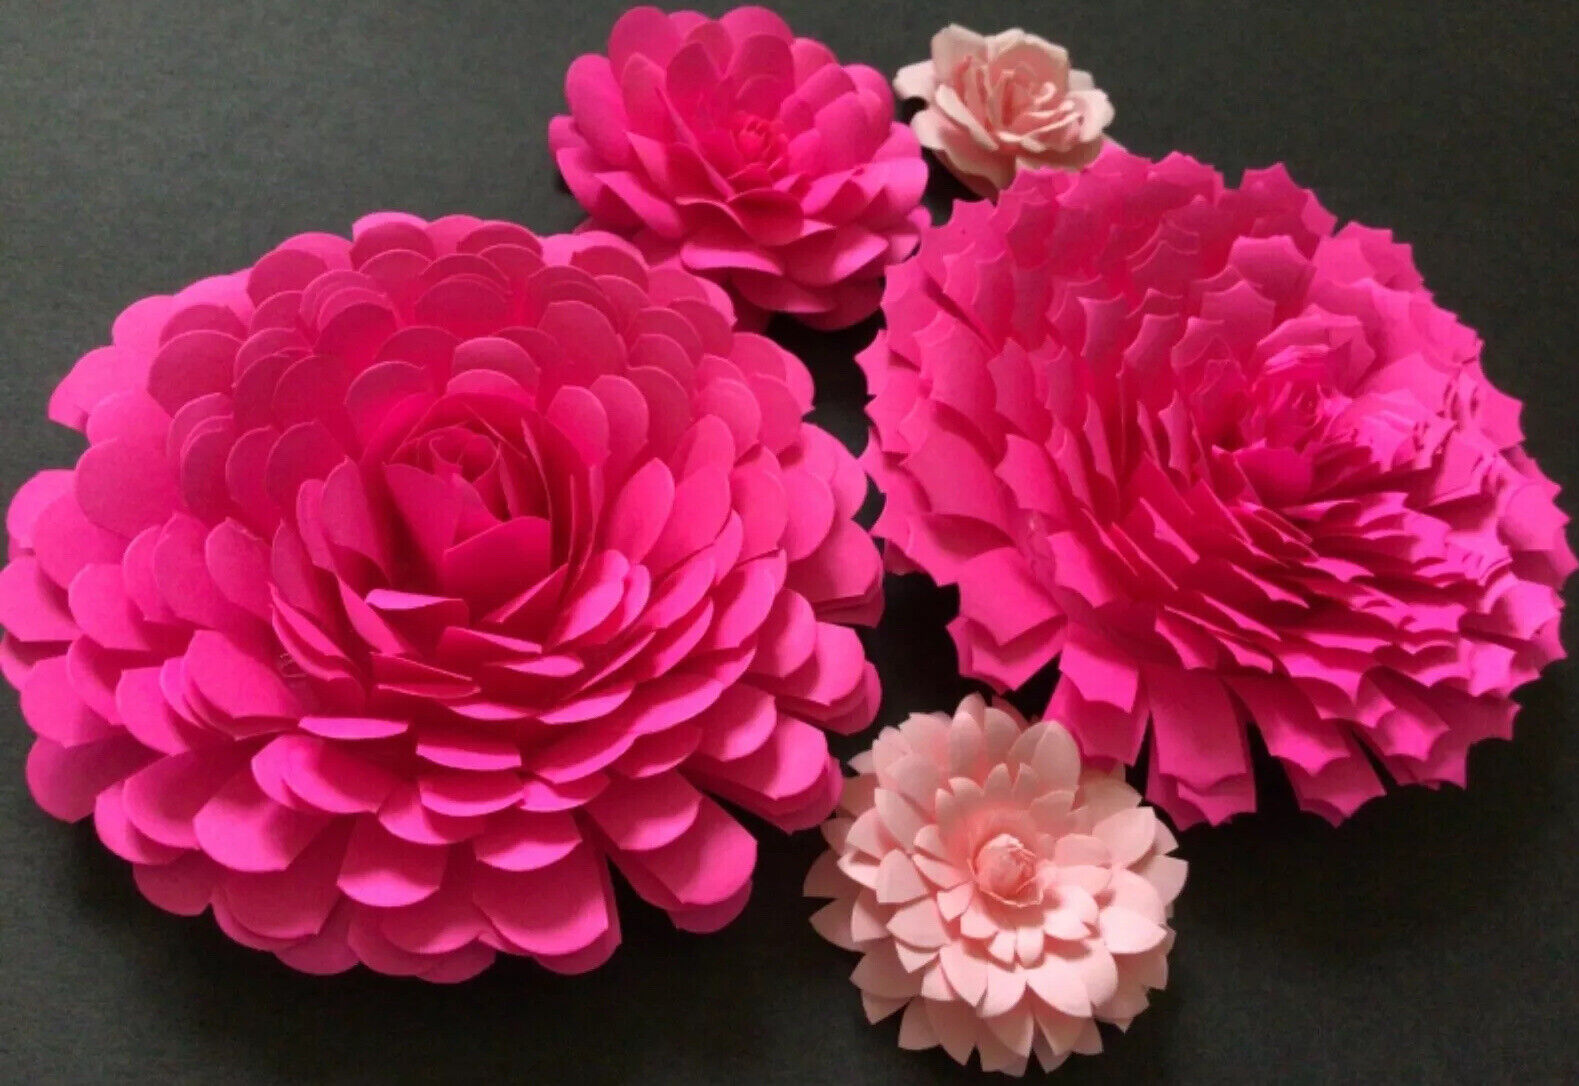 Paper Flowers 3-D Handcrafted 5 pcs Pink DIY Wedding Party Decor Craft Backdrop Unbranded Small Backdrop - фотография #7